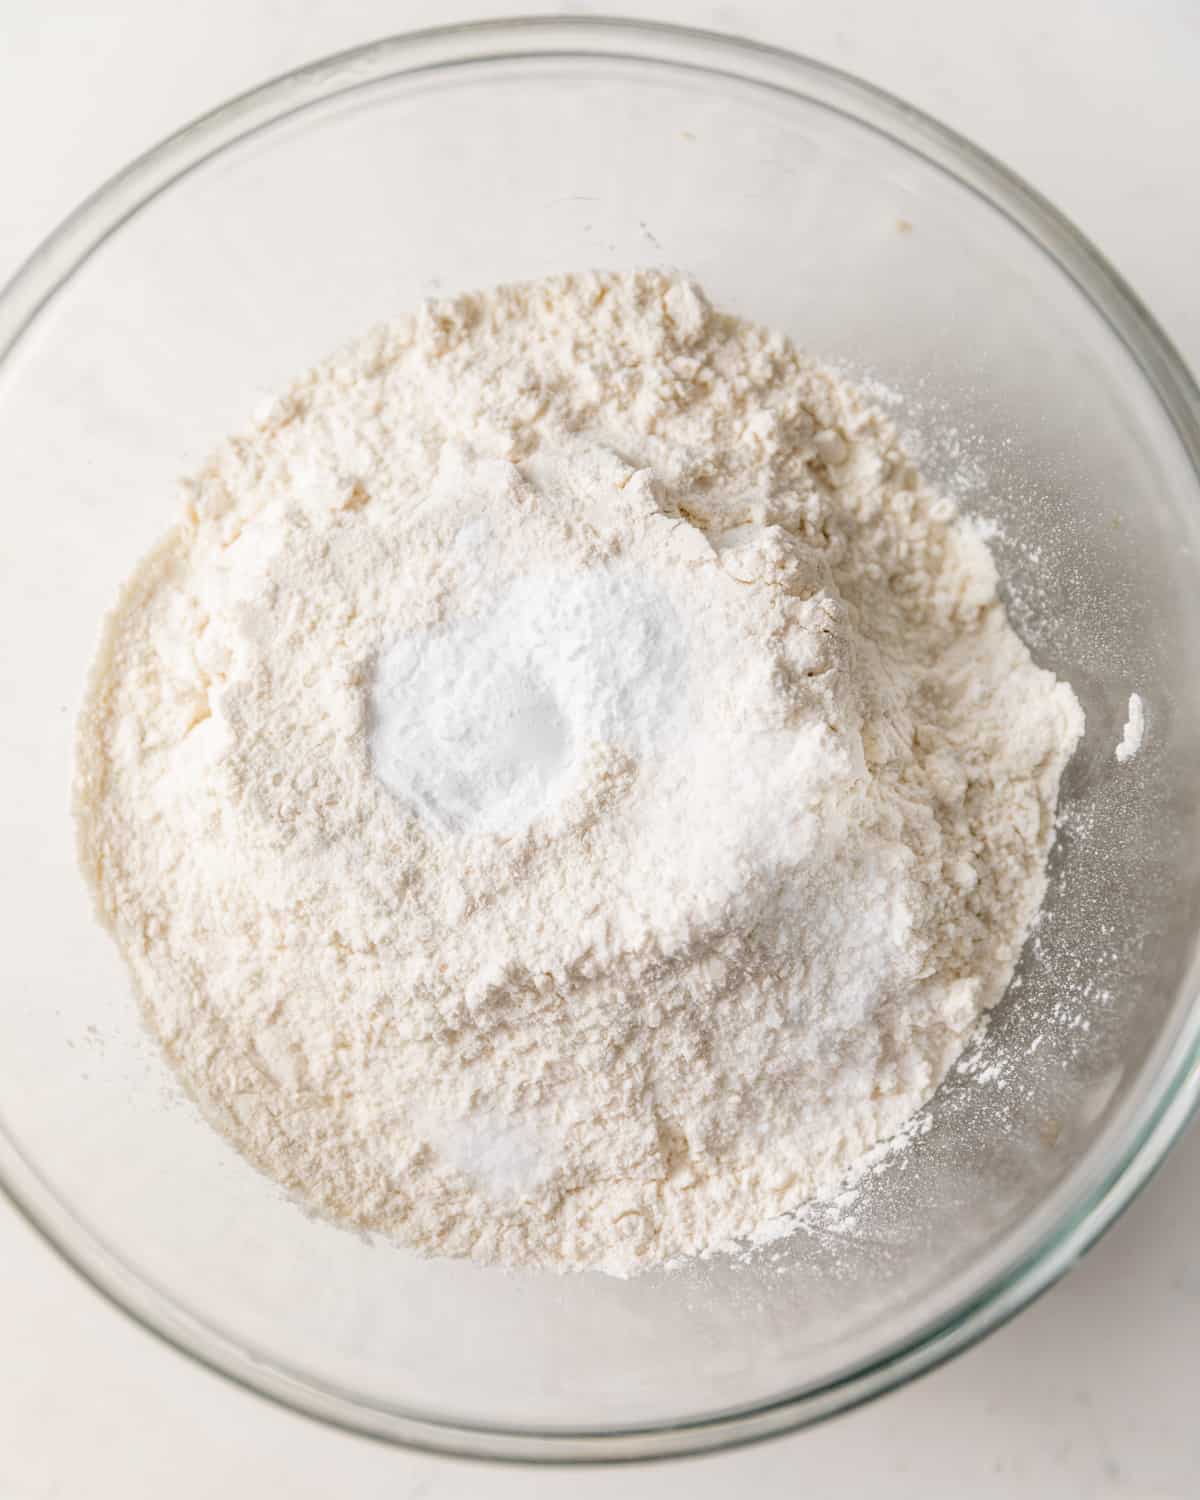 the dry ingredients in a mixing bowl - all purpose flour, baking soda, baking powder, and salt.